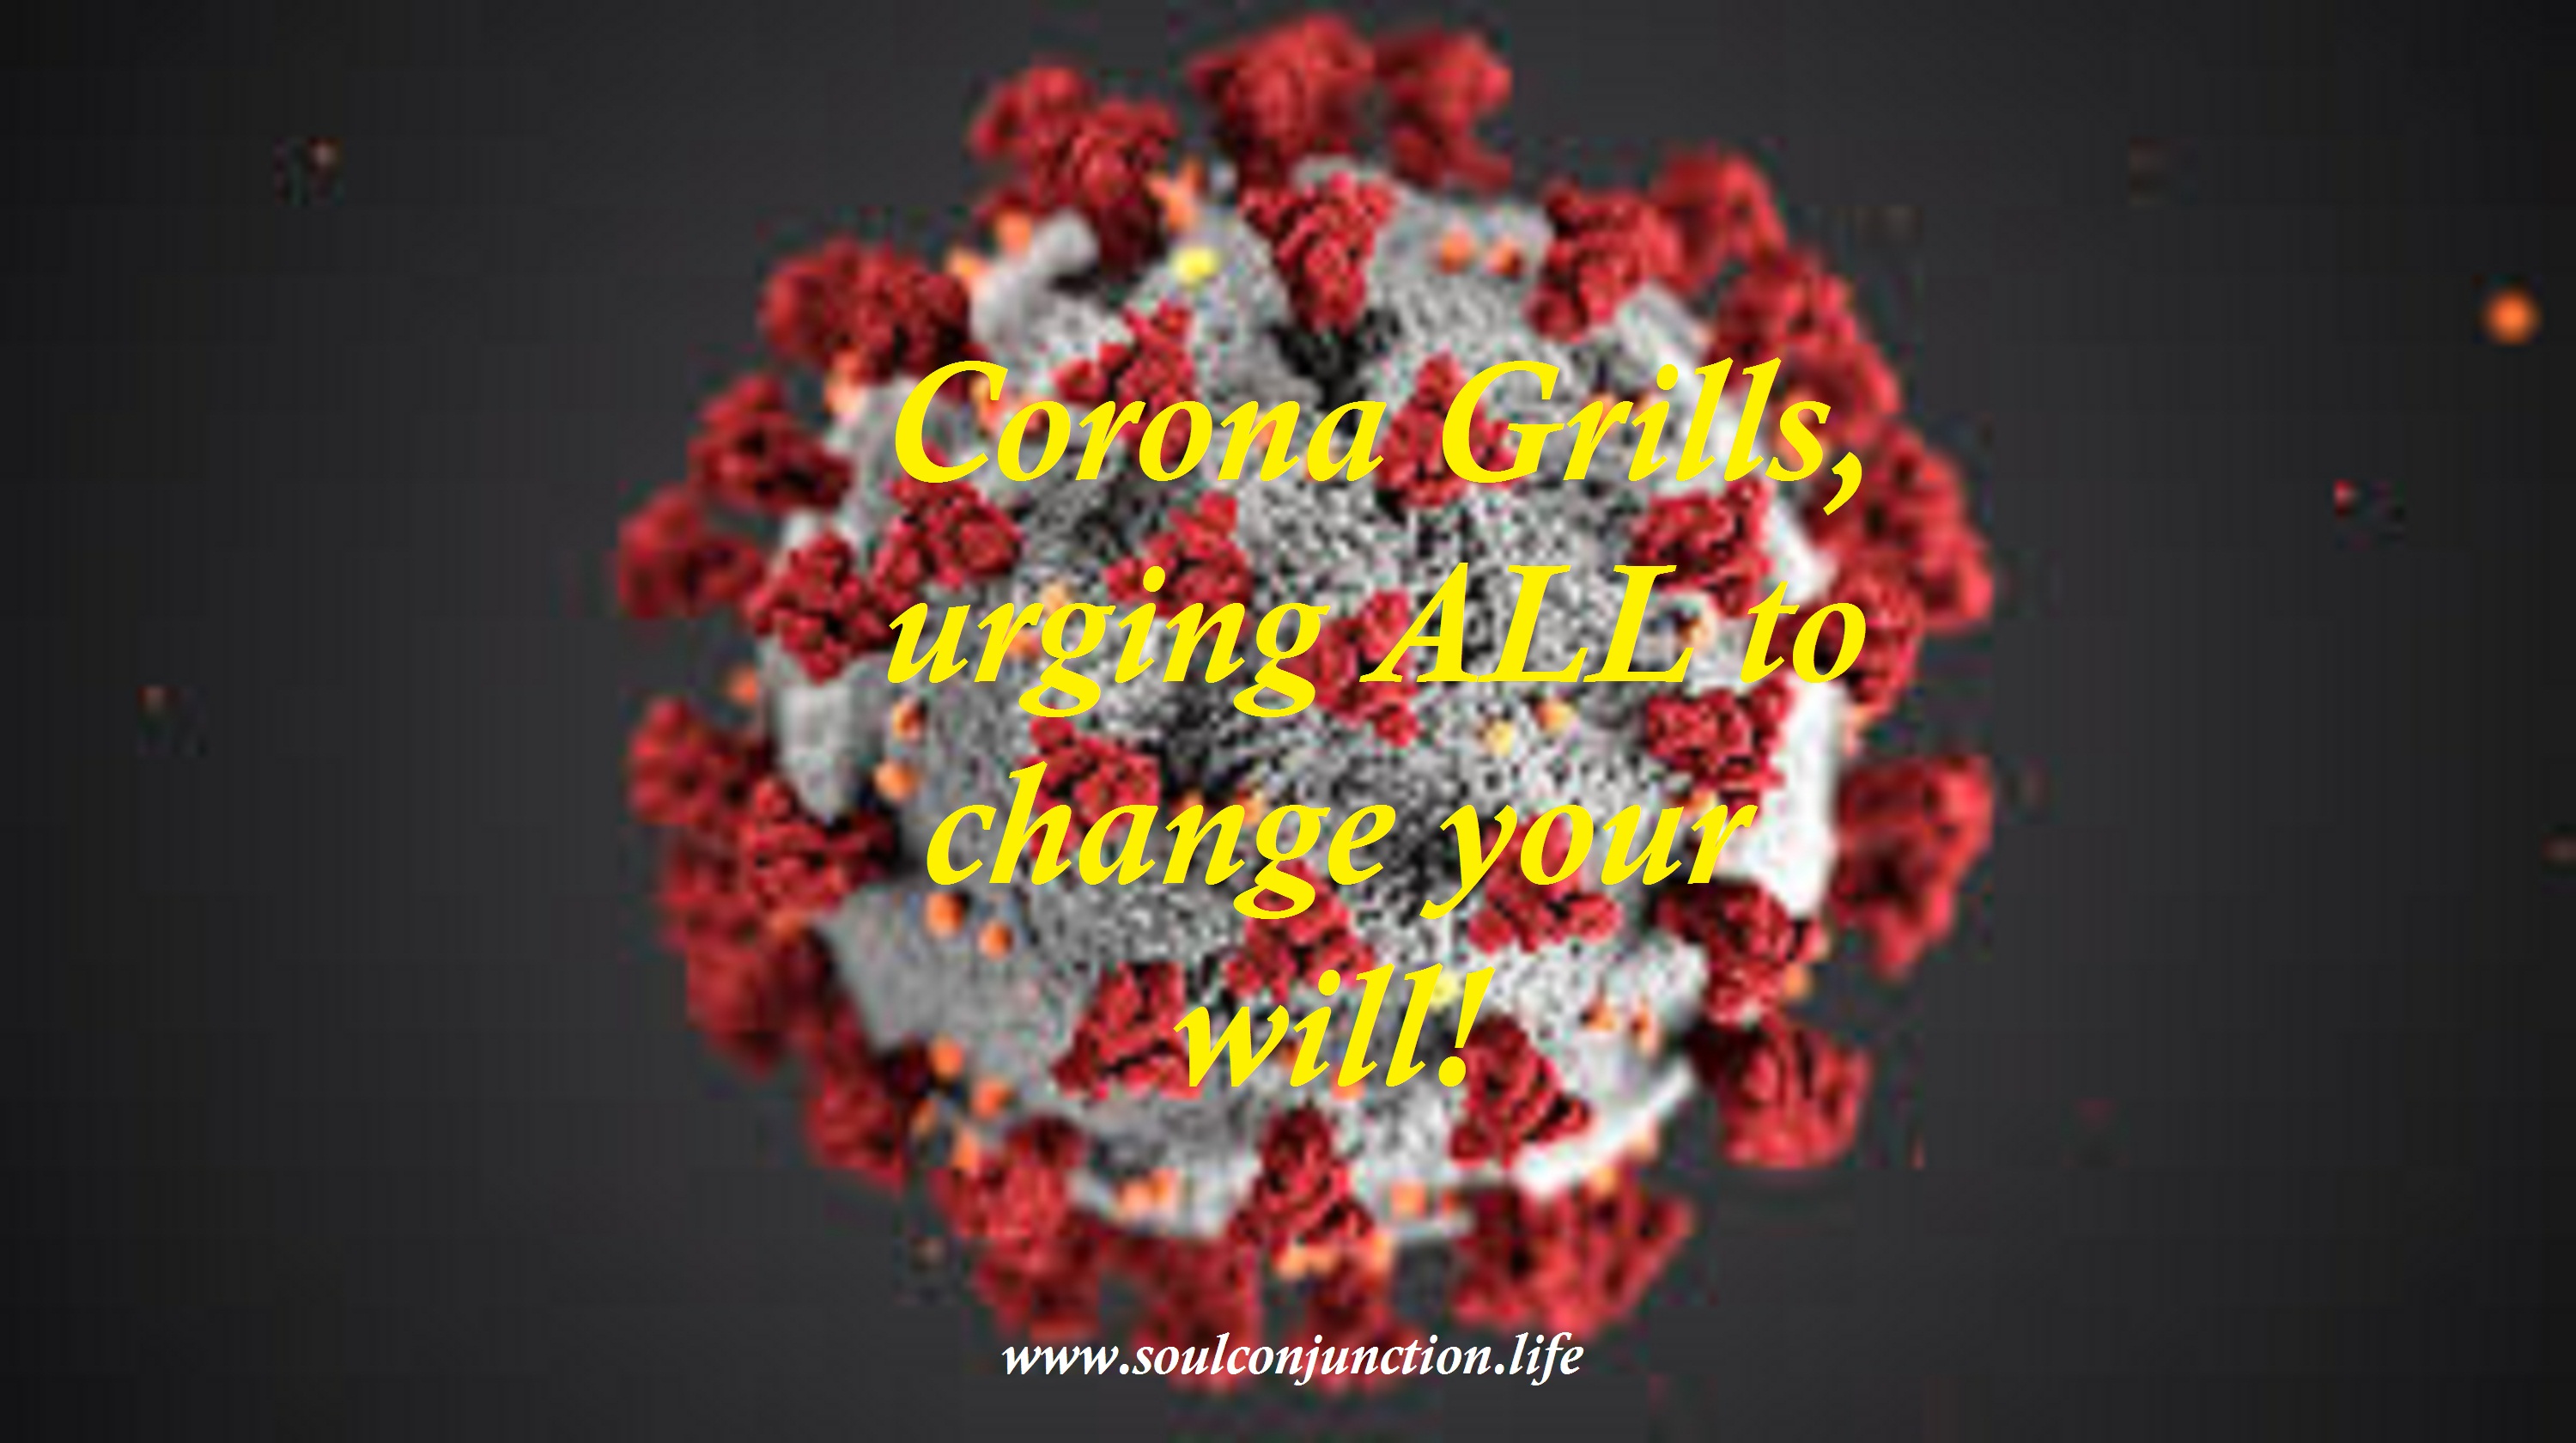 Corona Grills, Urging ALL to Change Your Will!_soulconjuction.com